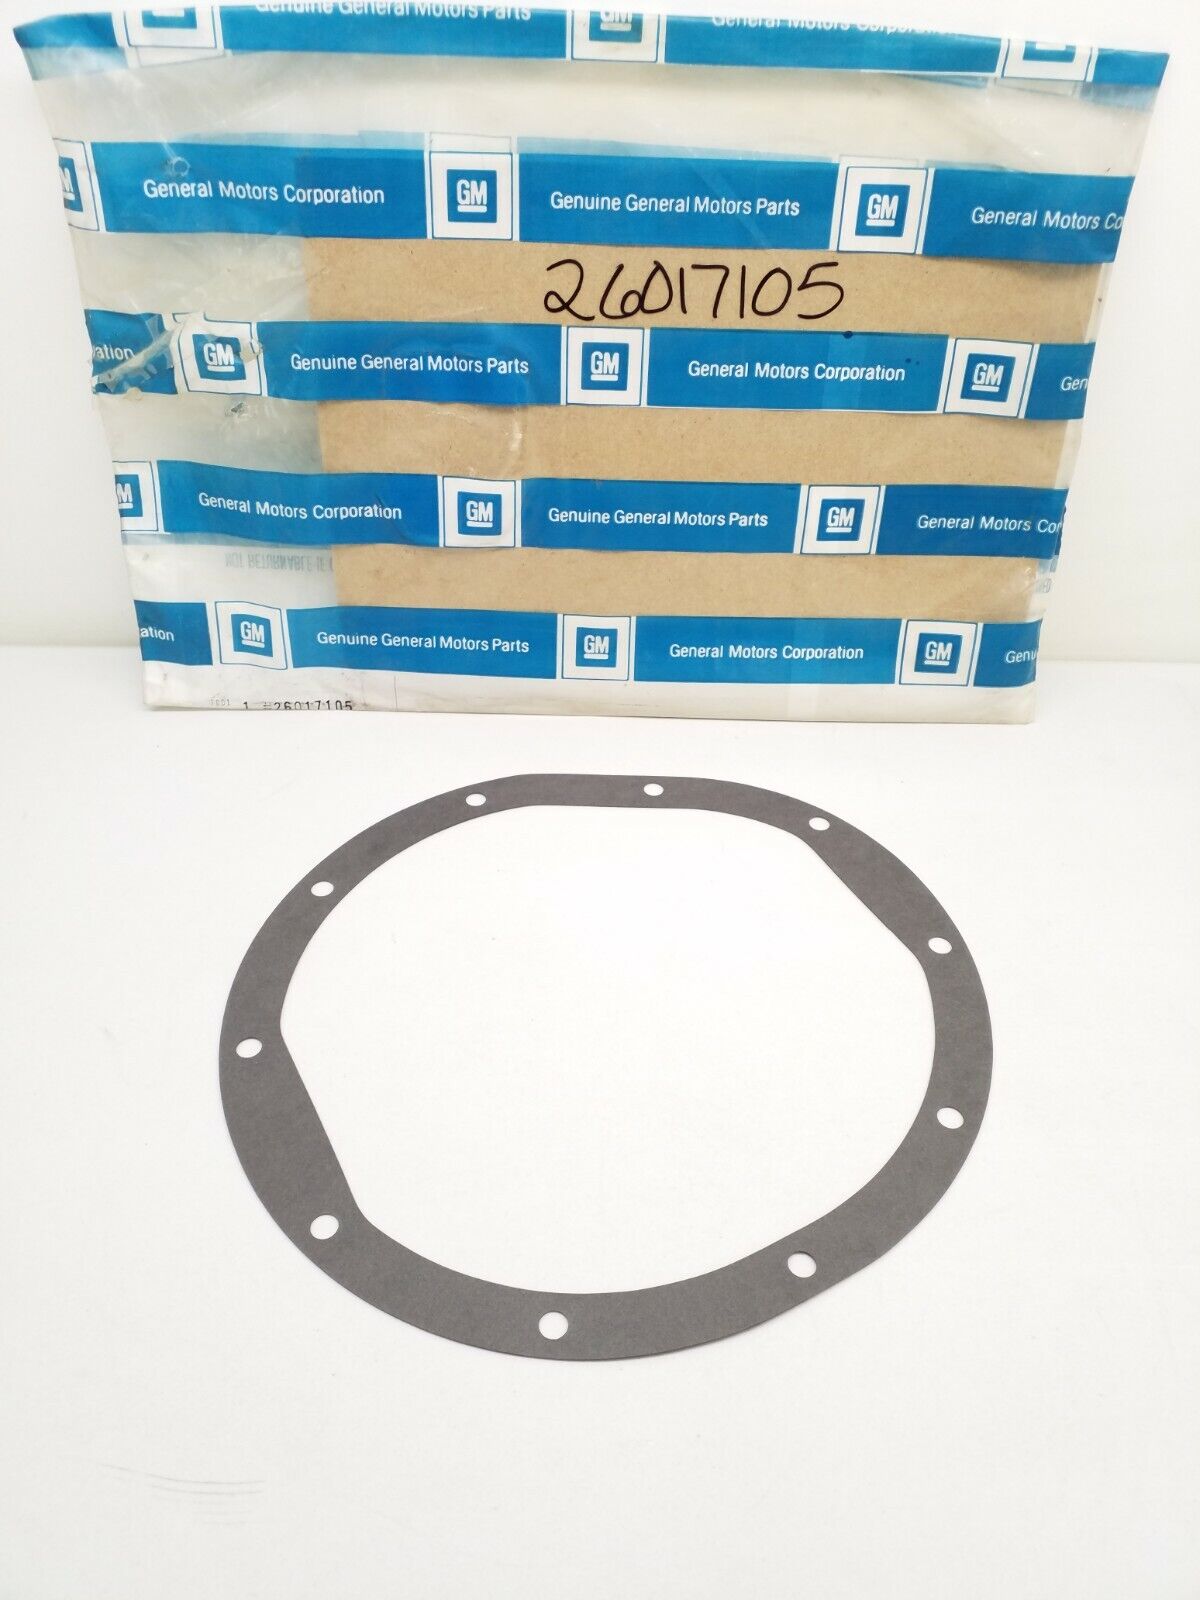 26017105 GM Differential Carrier Cover Gasket - Qty. 1 Piece